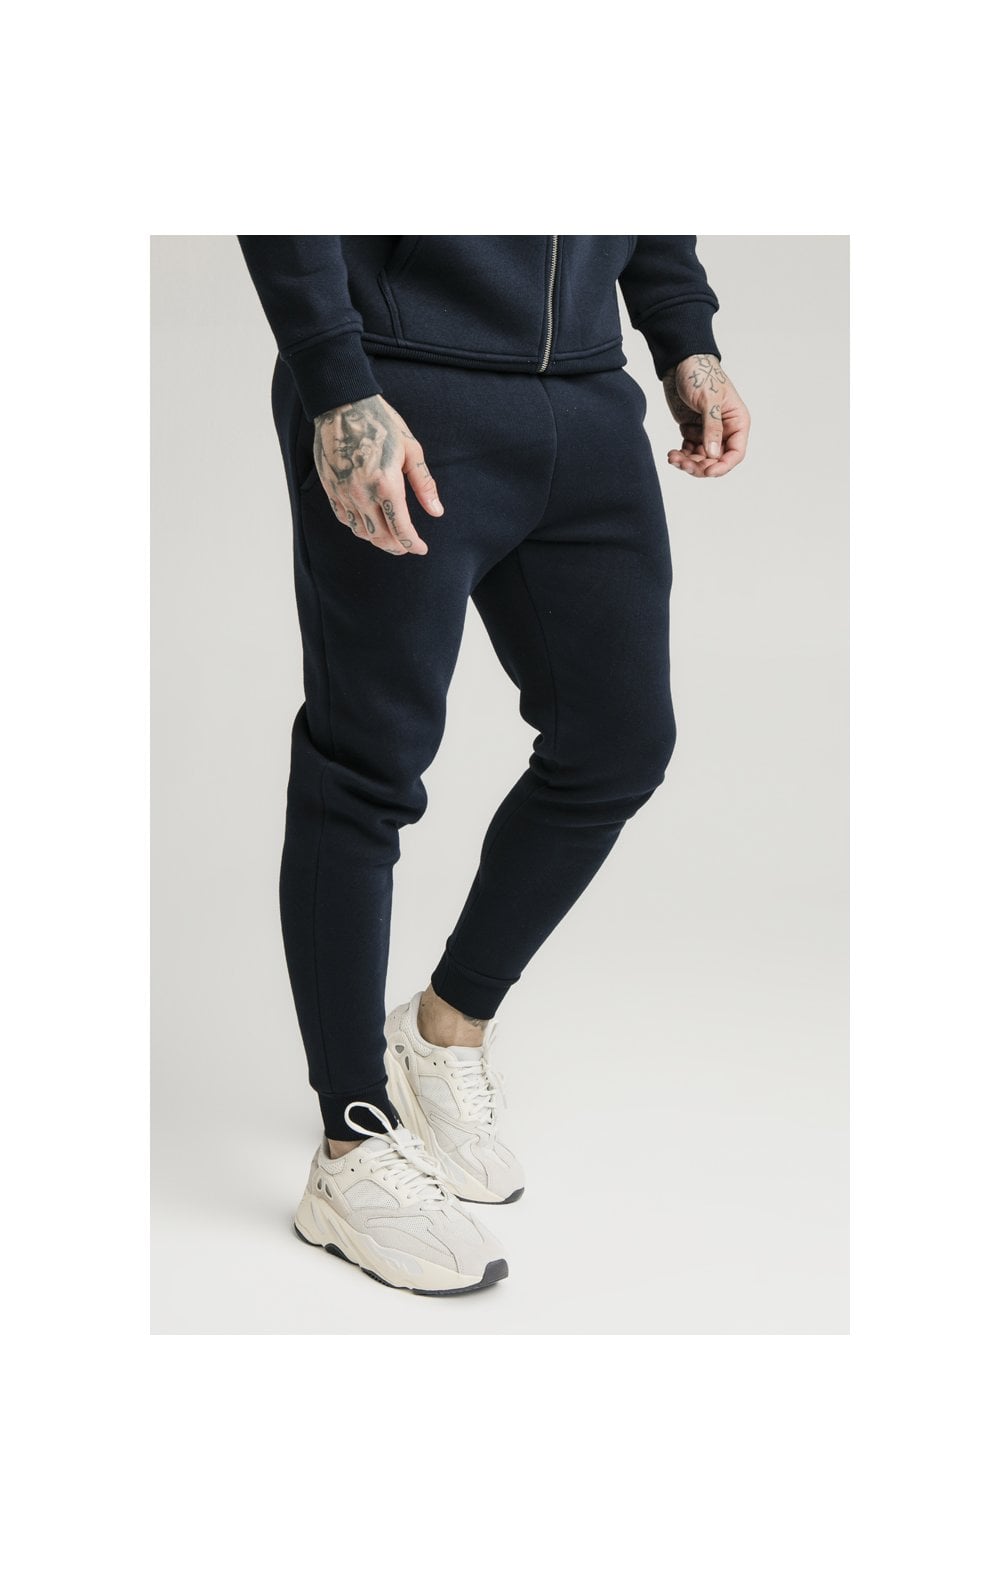 SikSilk Muscle Fit Jogger – Navy (2)